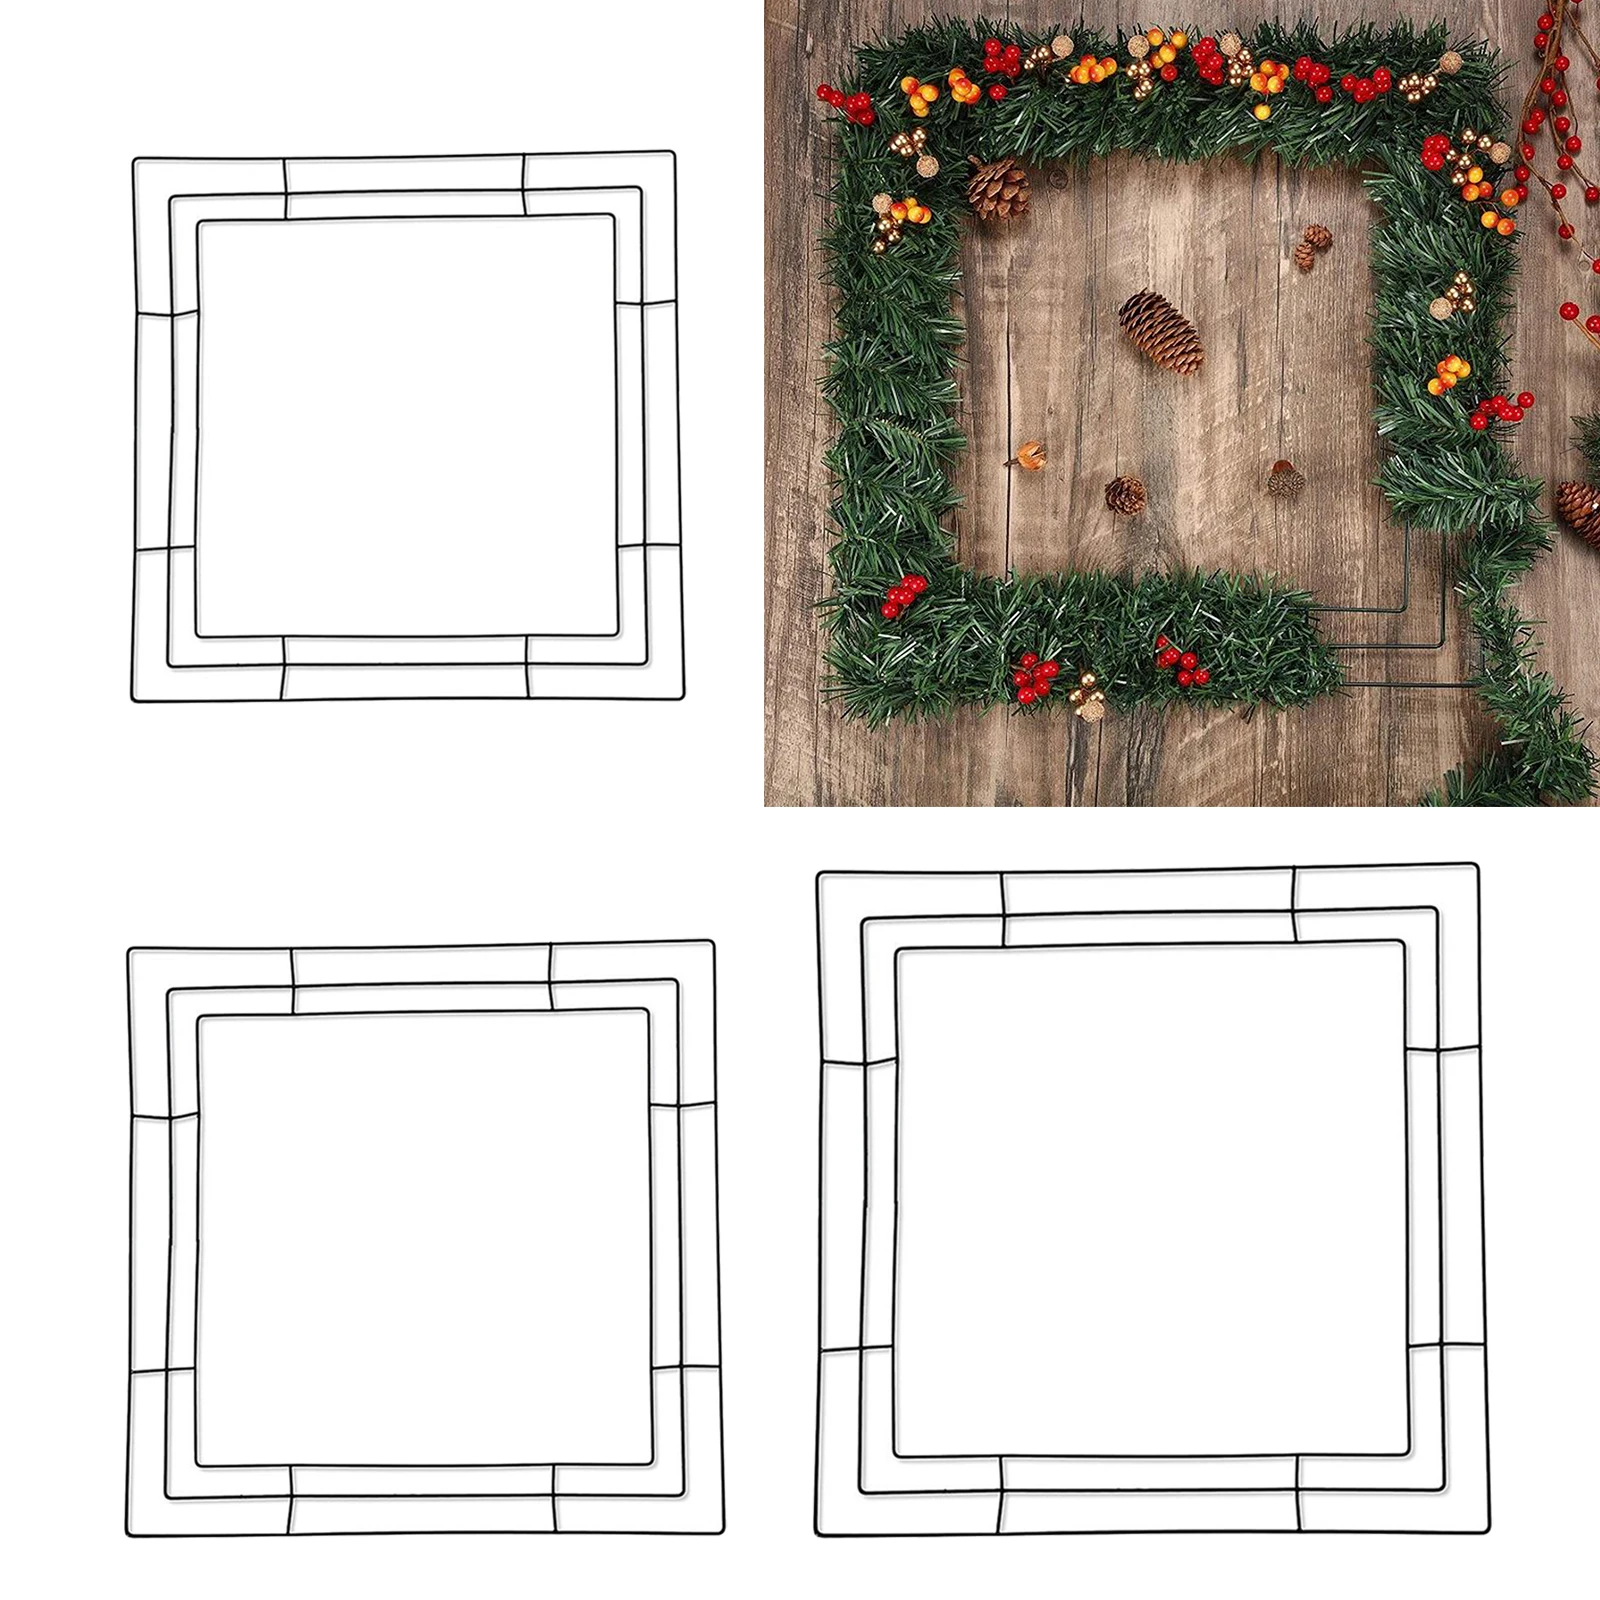 Iron Square Wire Wreath Frame Craft DIY for Wedding Holiday Door Decoration